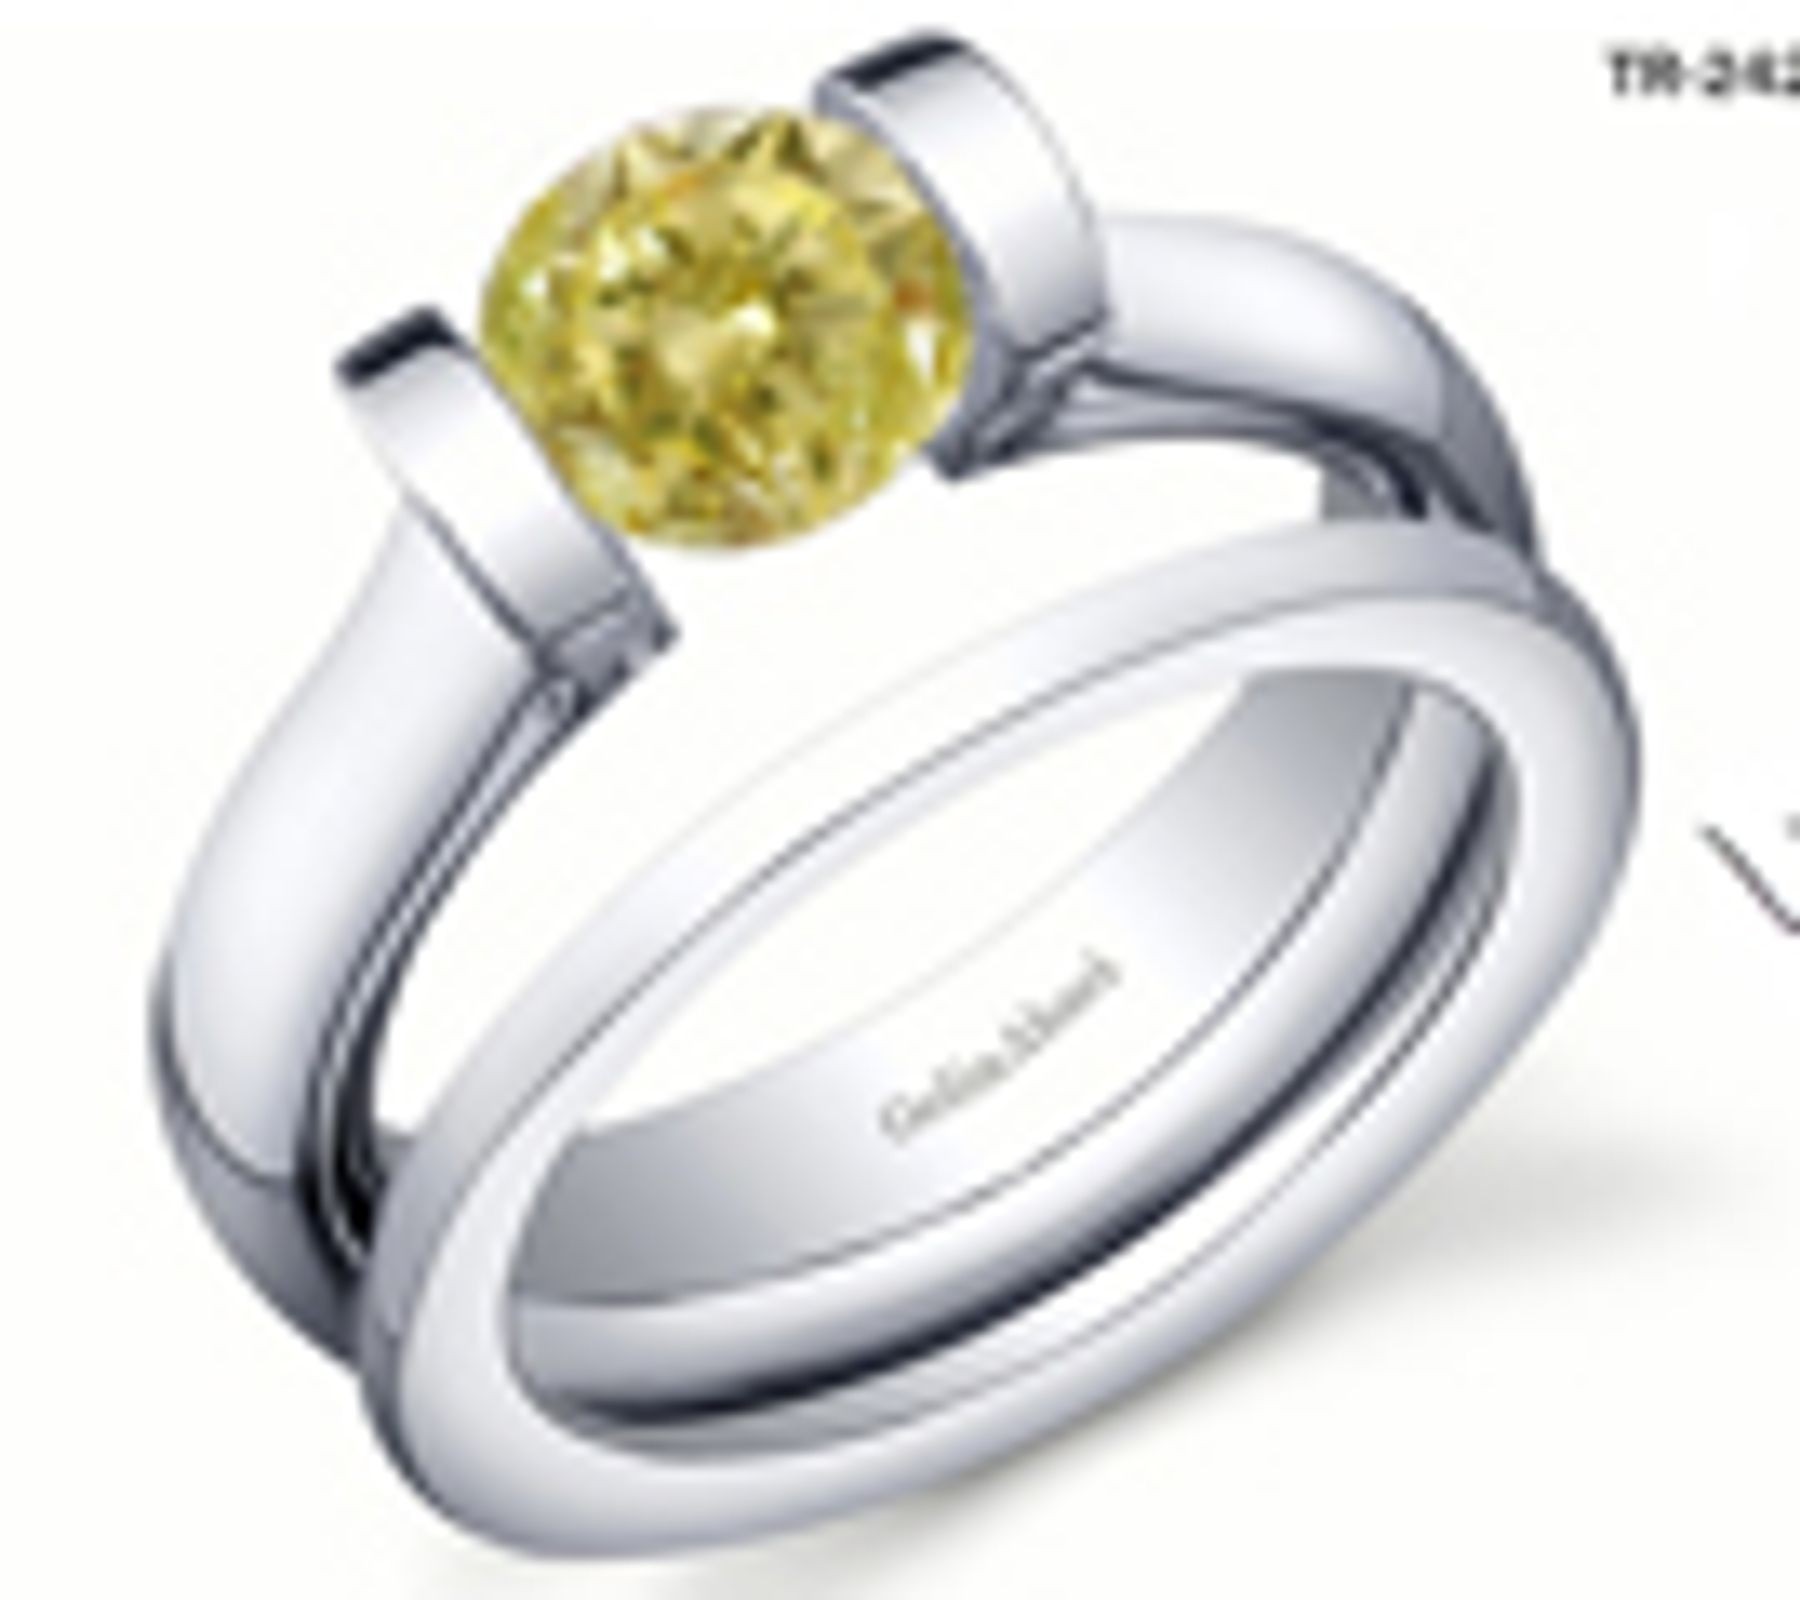 Exclusive Style Tension Set Jewelry: Tension Set Yellow Diamond Rings